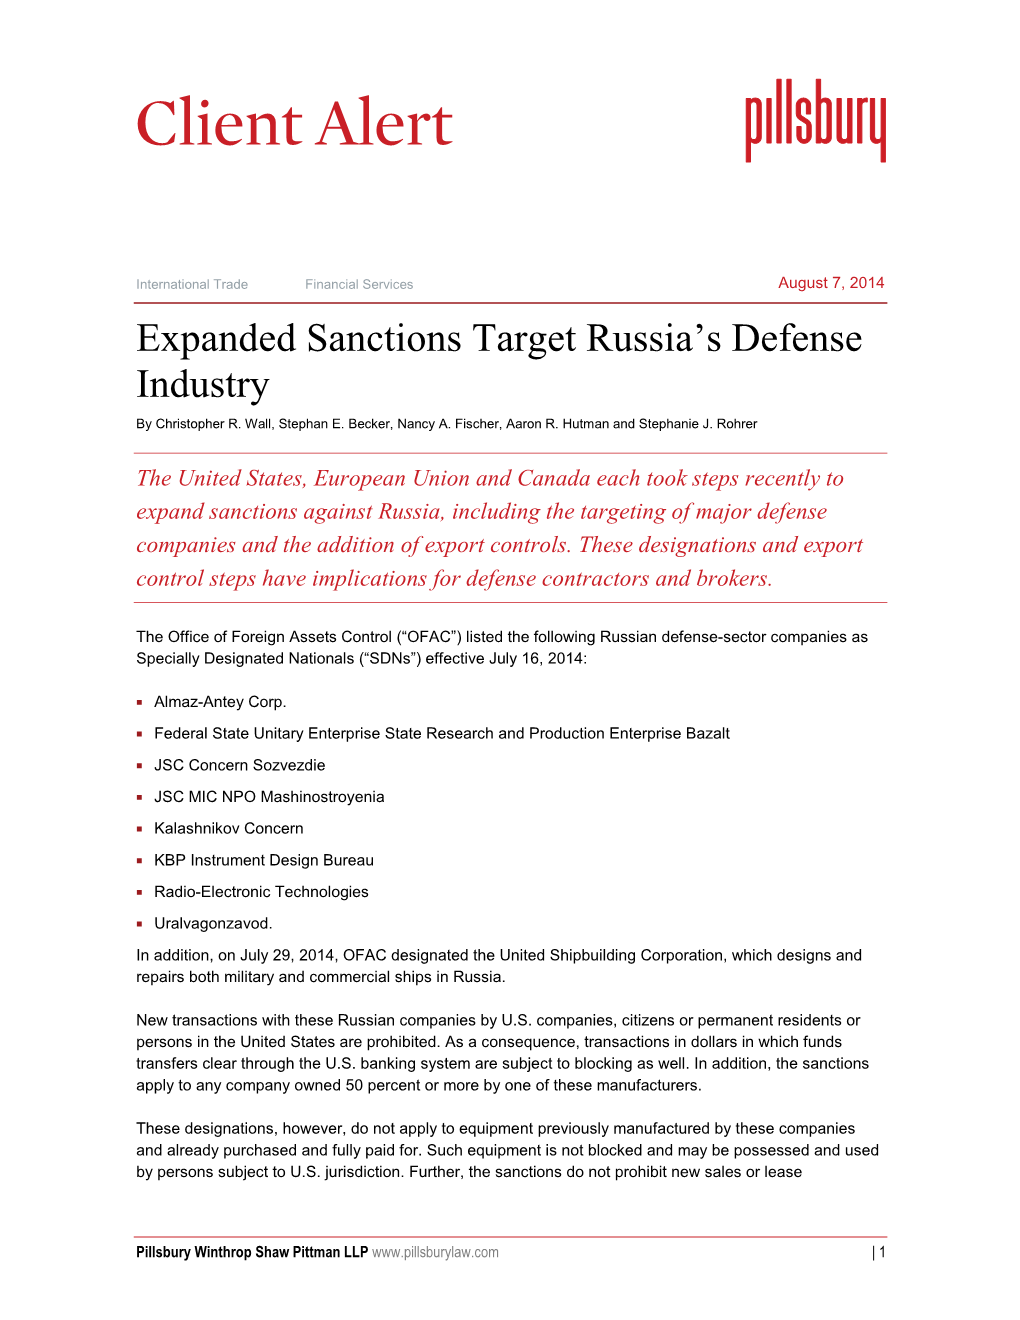 Expanded Sanctions Target Russia's Defense Industry